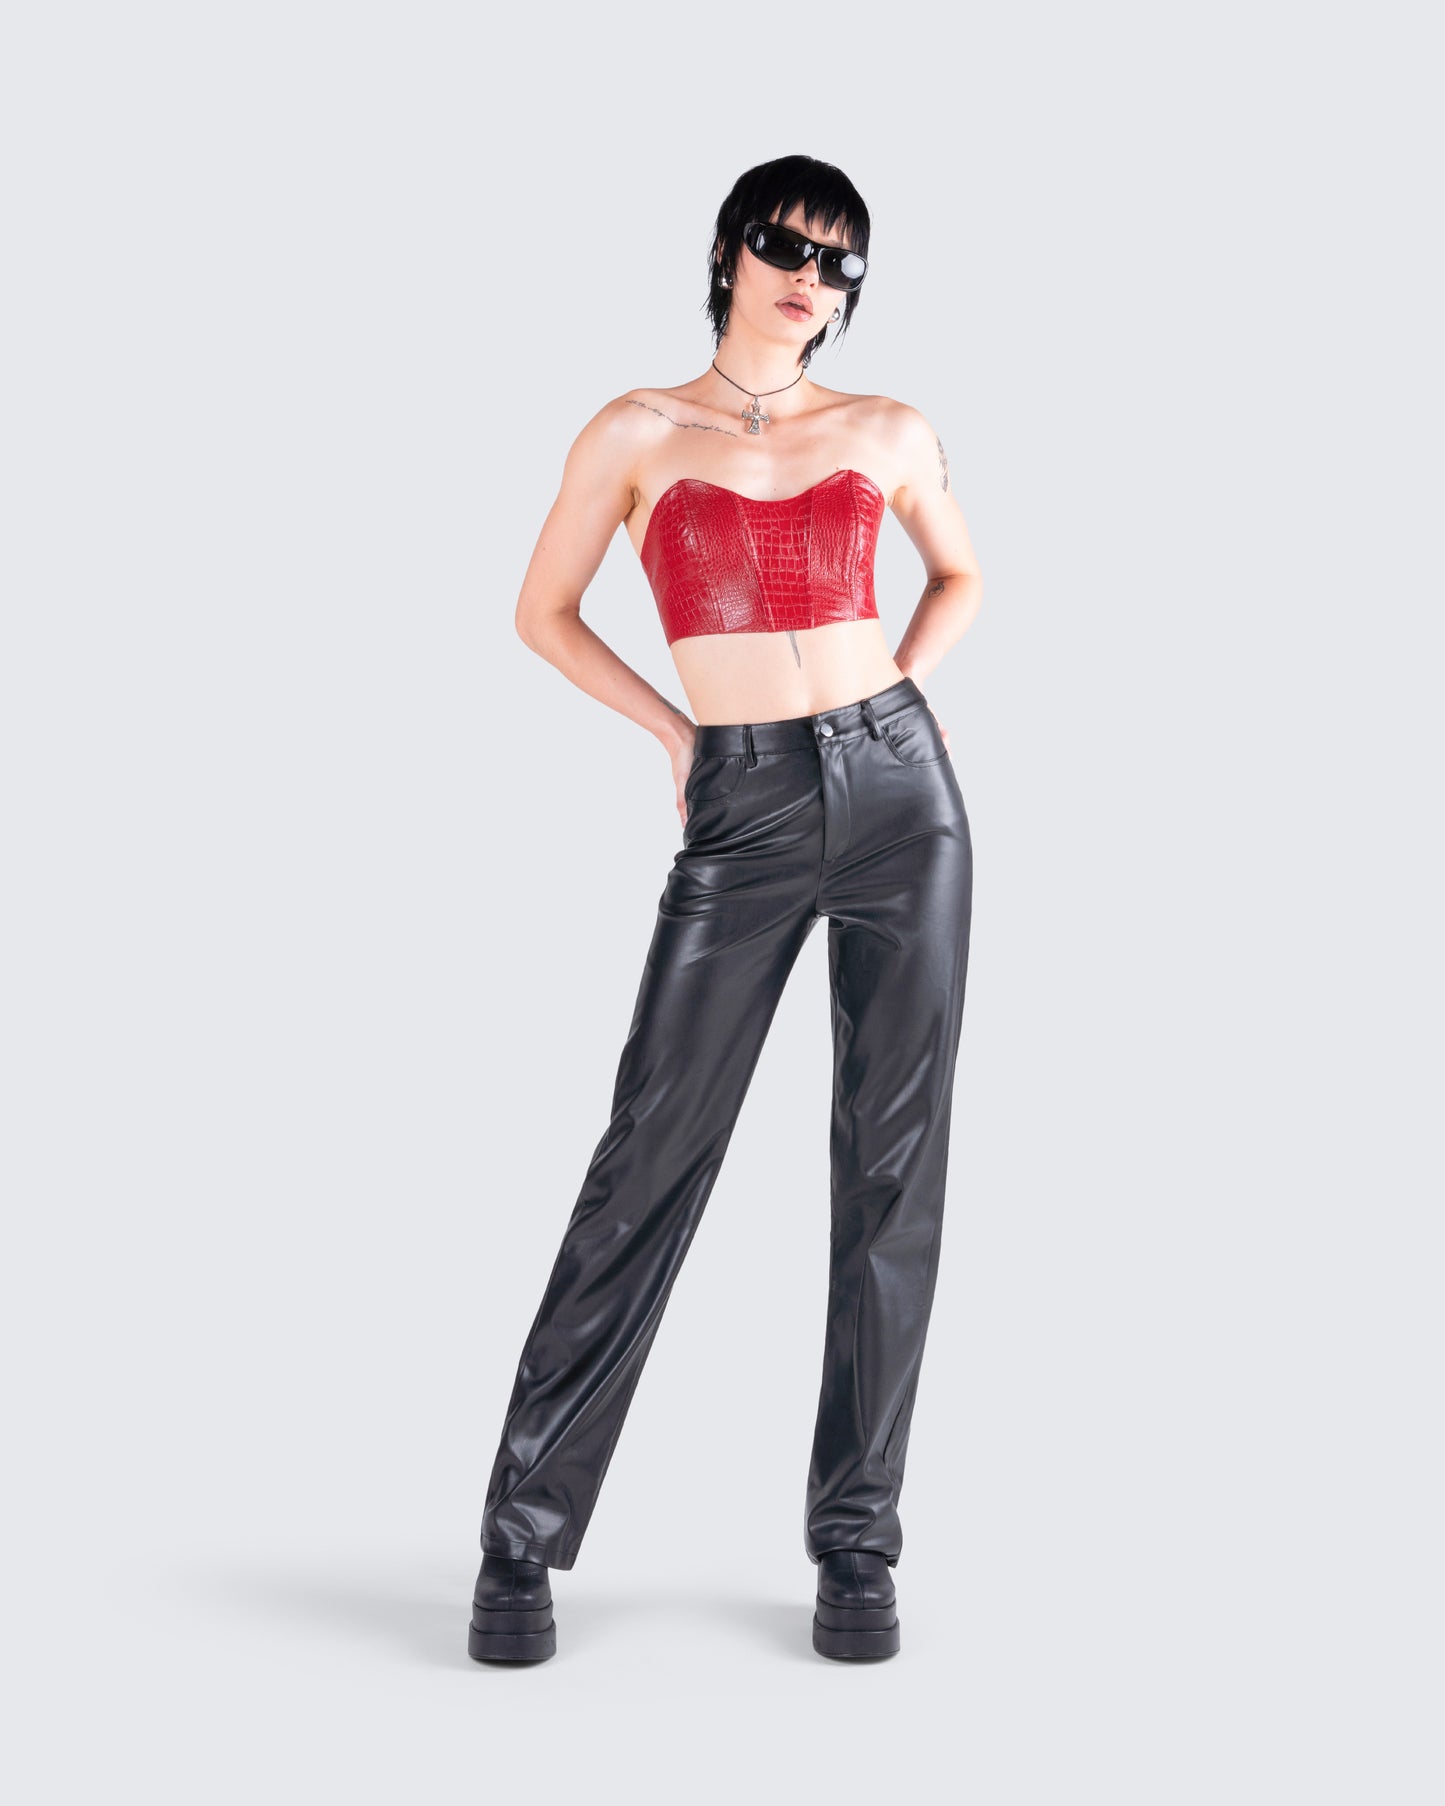 Darcy Leather Pant